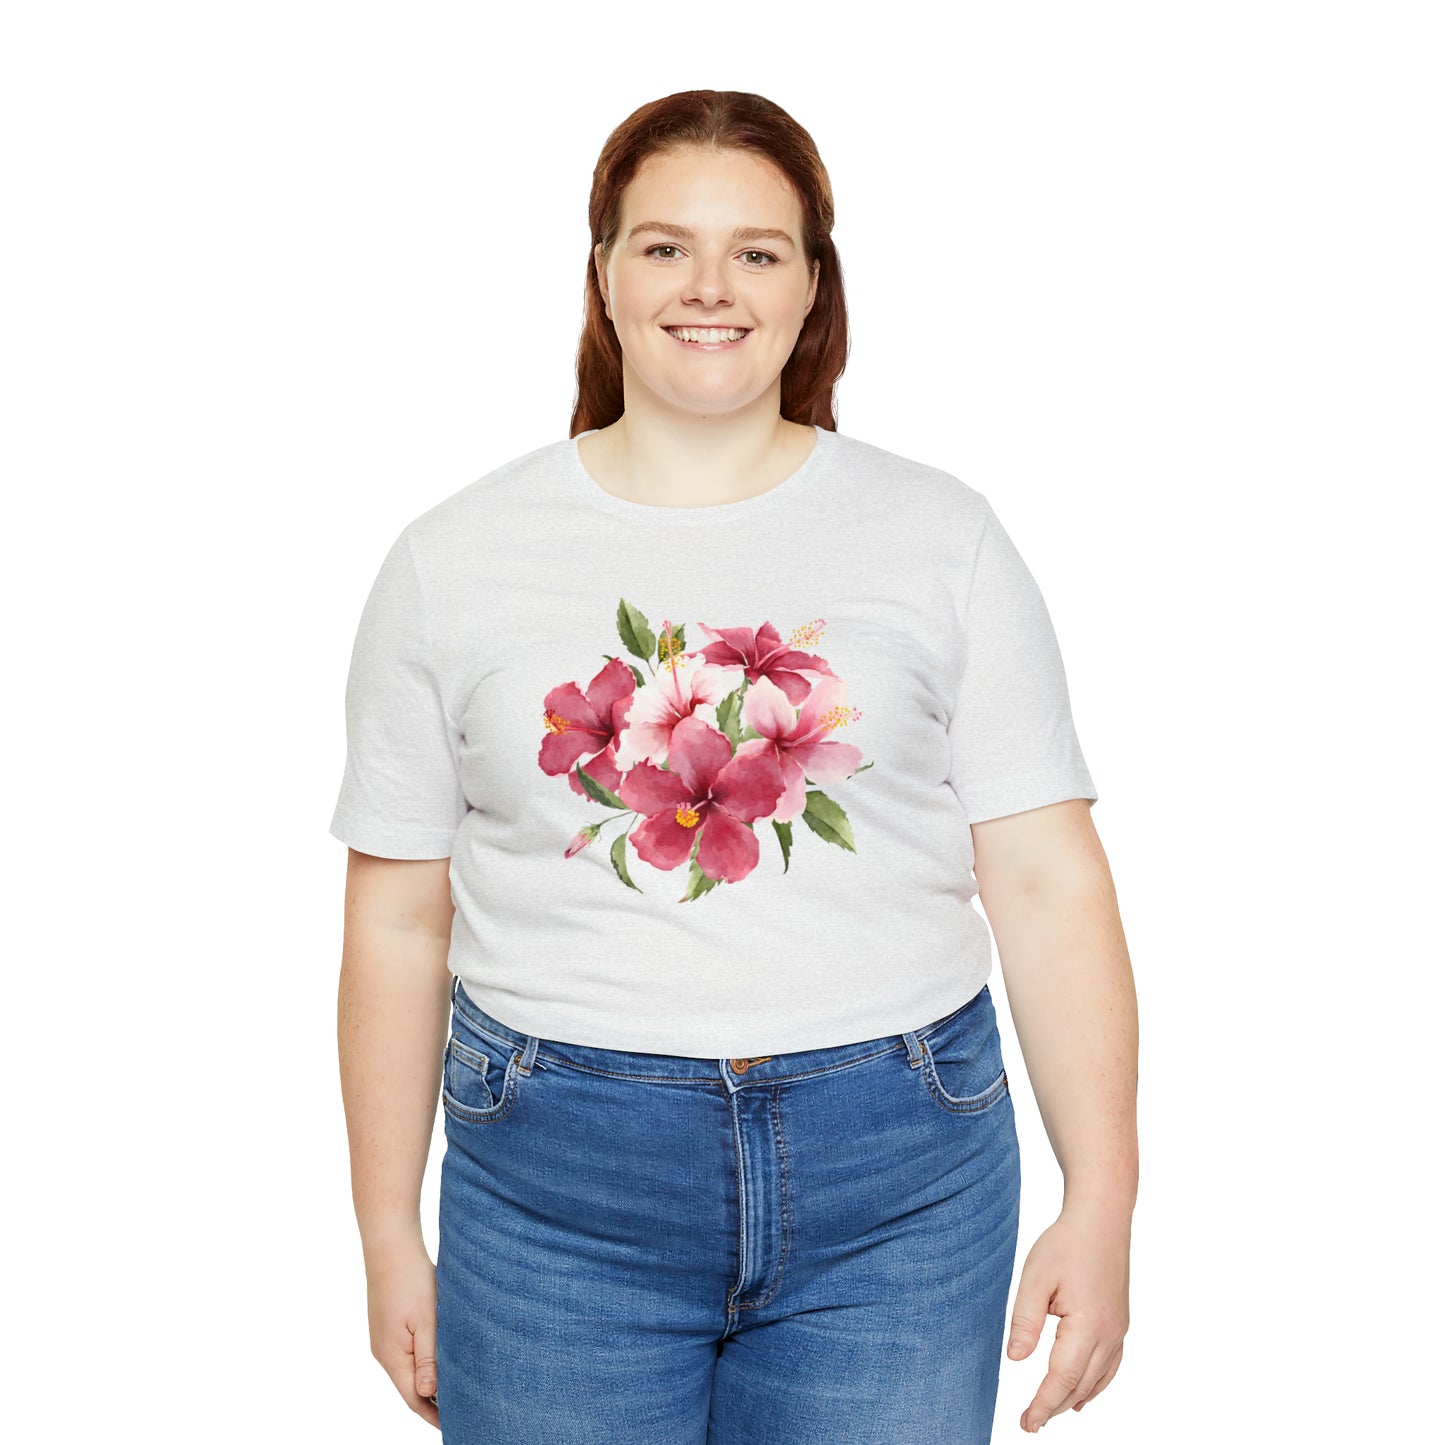 Mock up of a plus-size woman wearing the White shirt